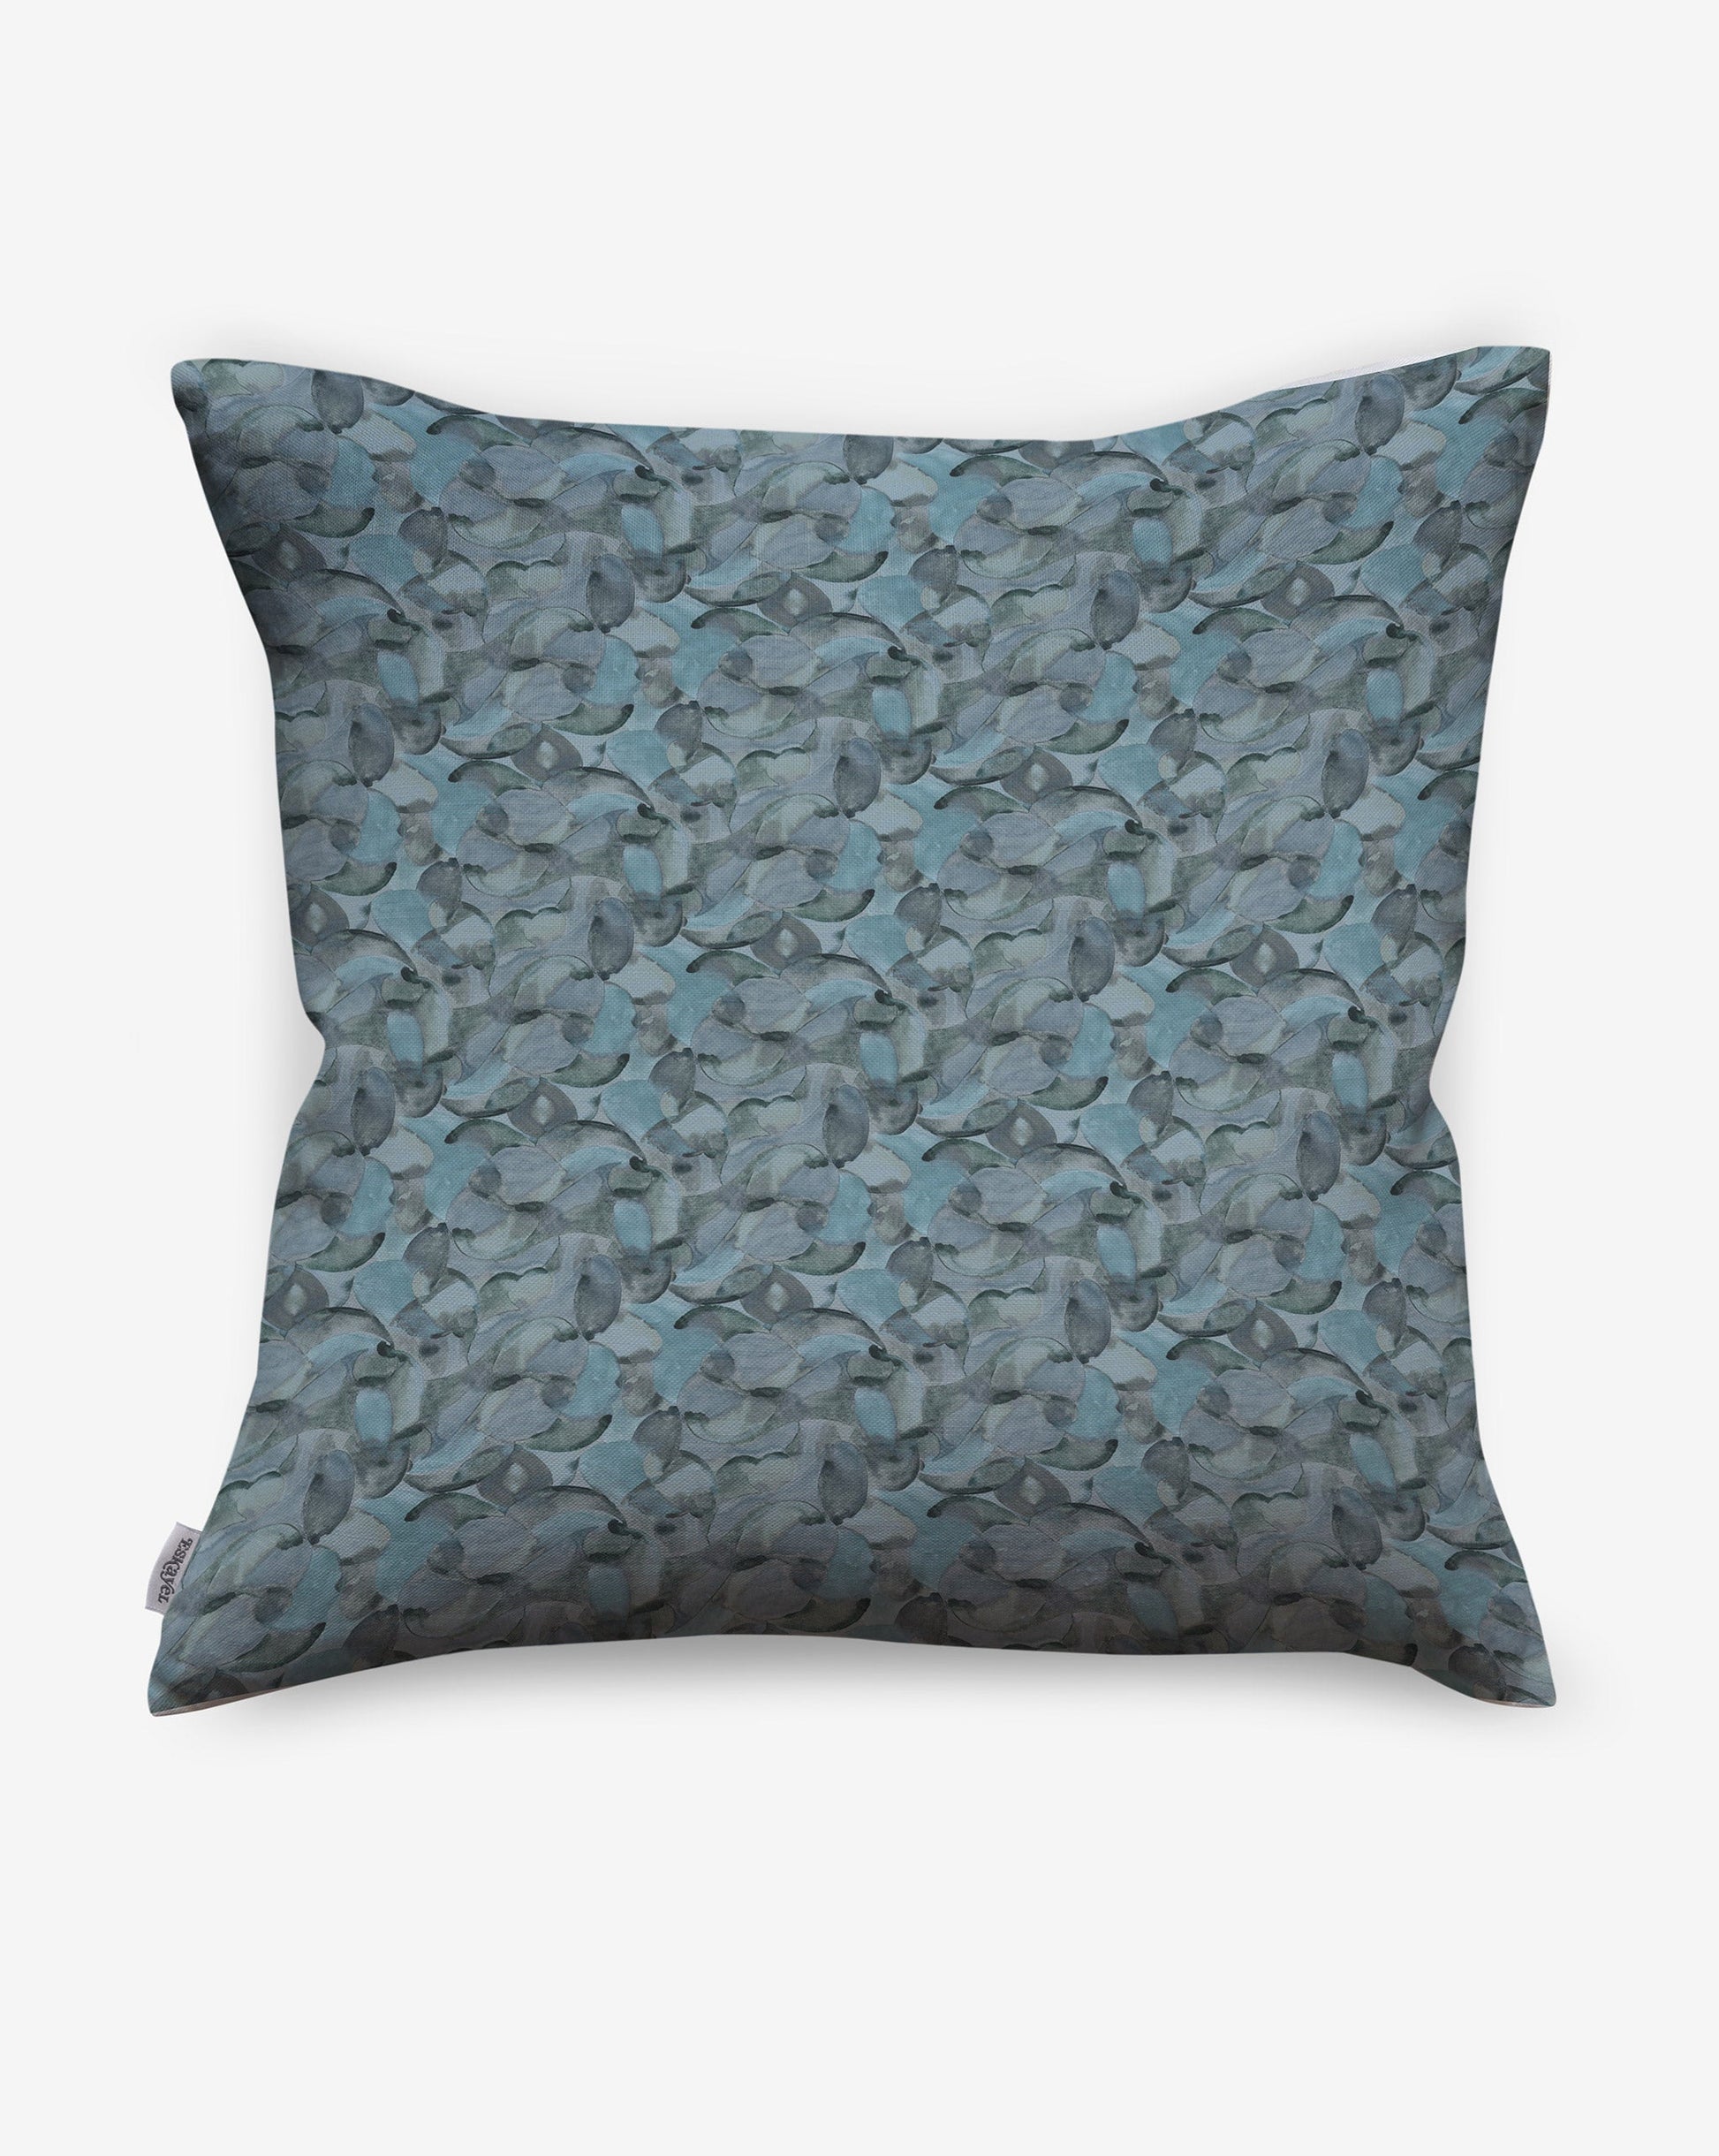 Orbs luxury linen pillows from Eskayel are available in the Lapis blue colorway.